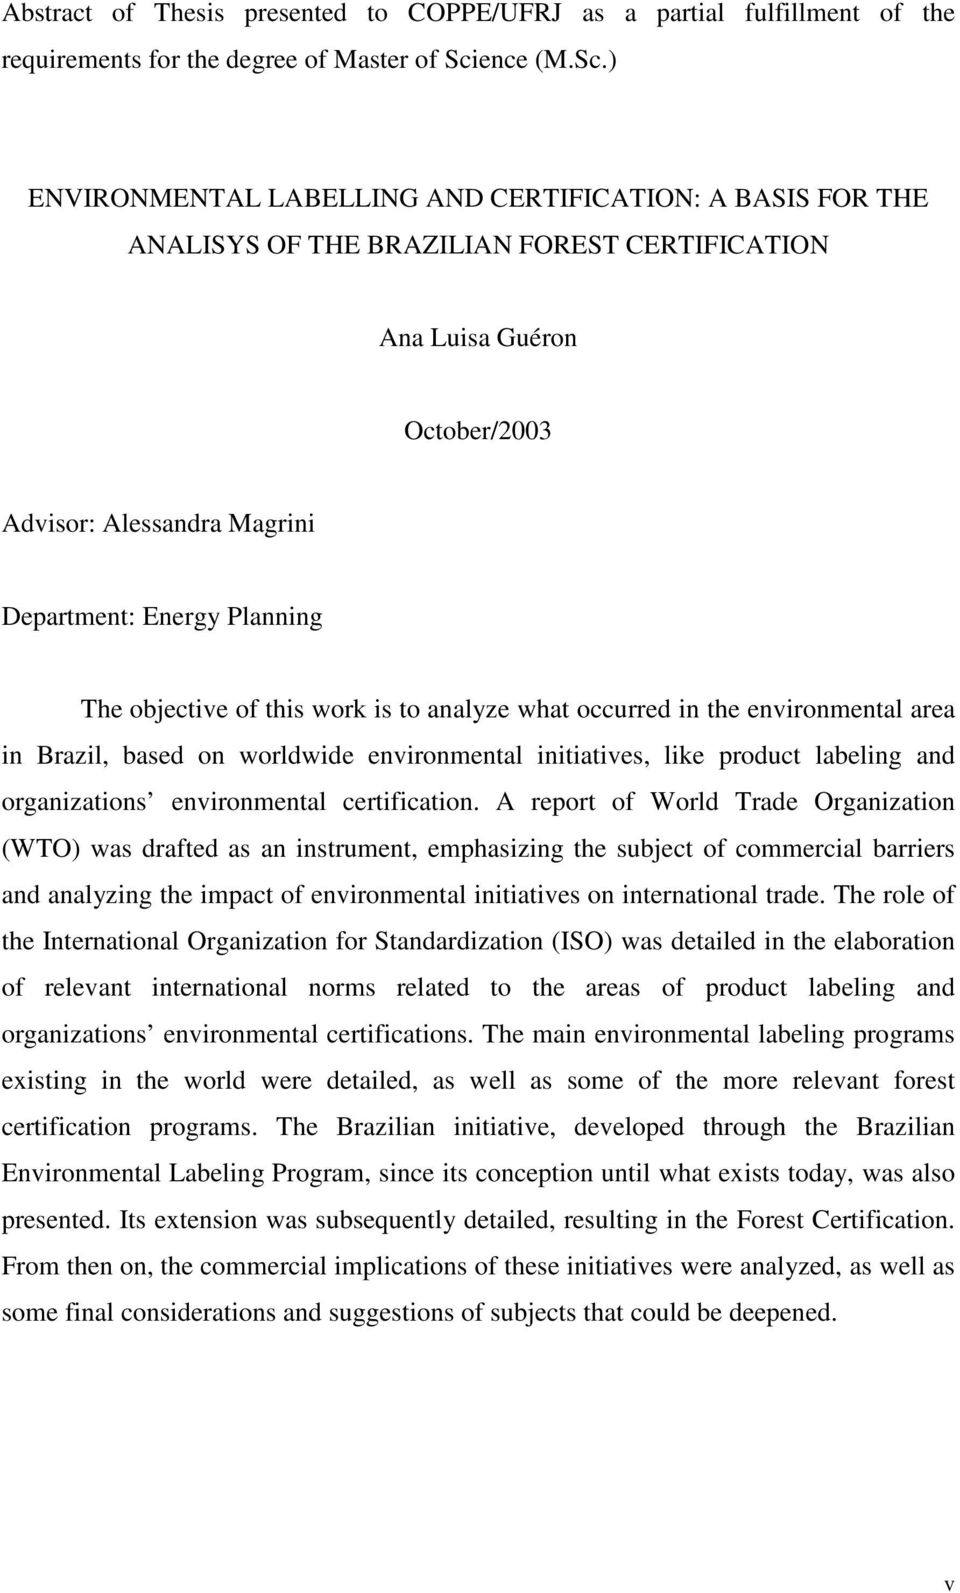 ) ENVIRONMENTAL LABELLING AND CERTIFICATION: A BASIS FOR THE ANALISYS OF THE BRAZILIAN FOREST CERTIFICATION Ana Luisa Guéron October/2003 Advisor: Alessandra Magrini Department: Energy Planning The